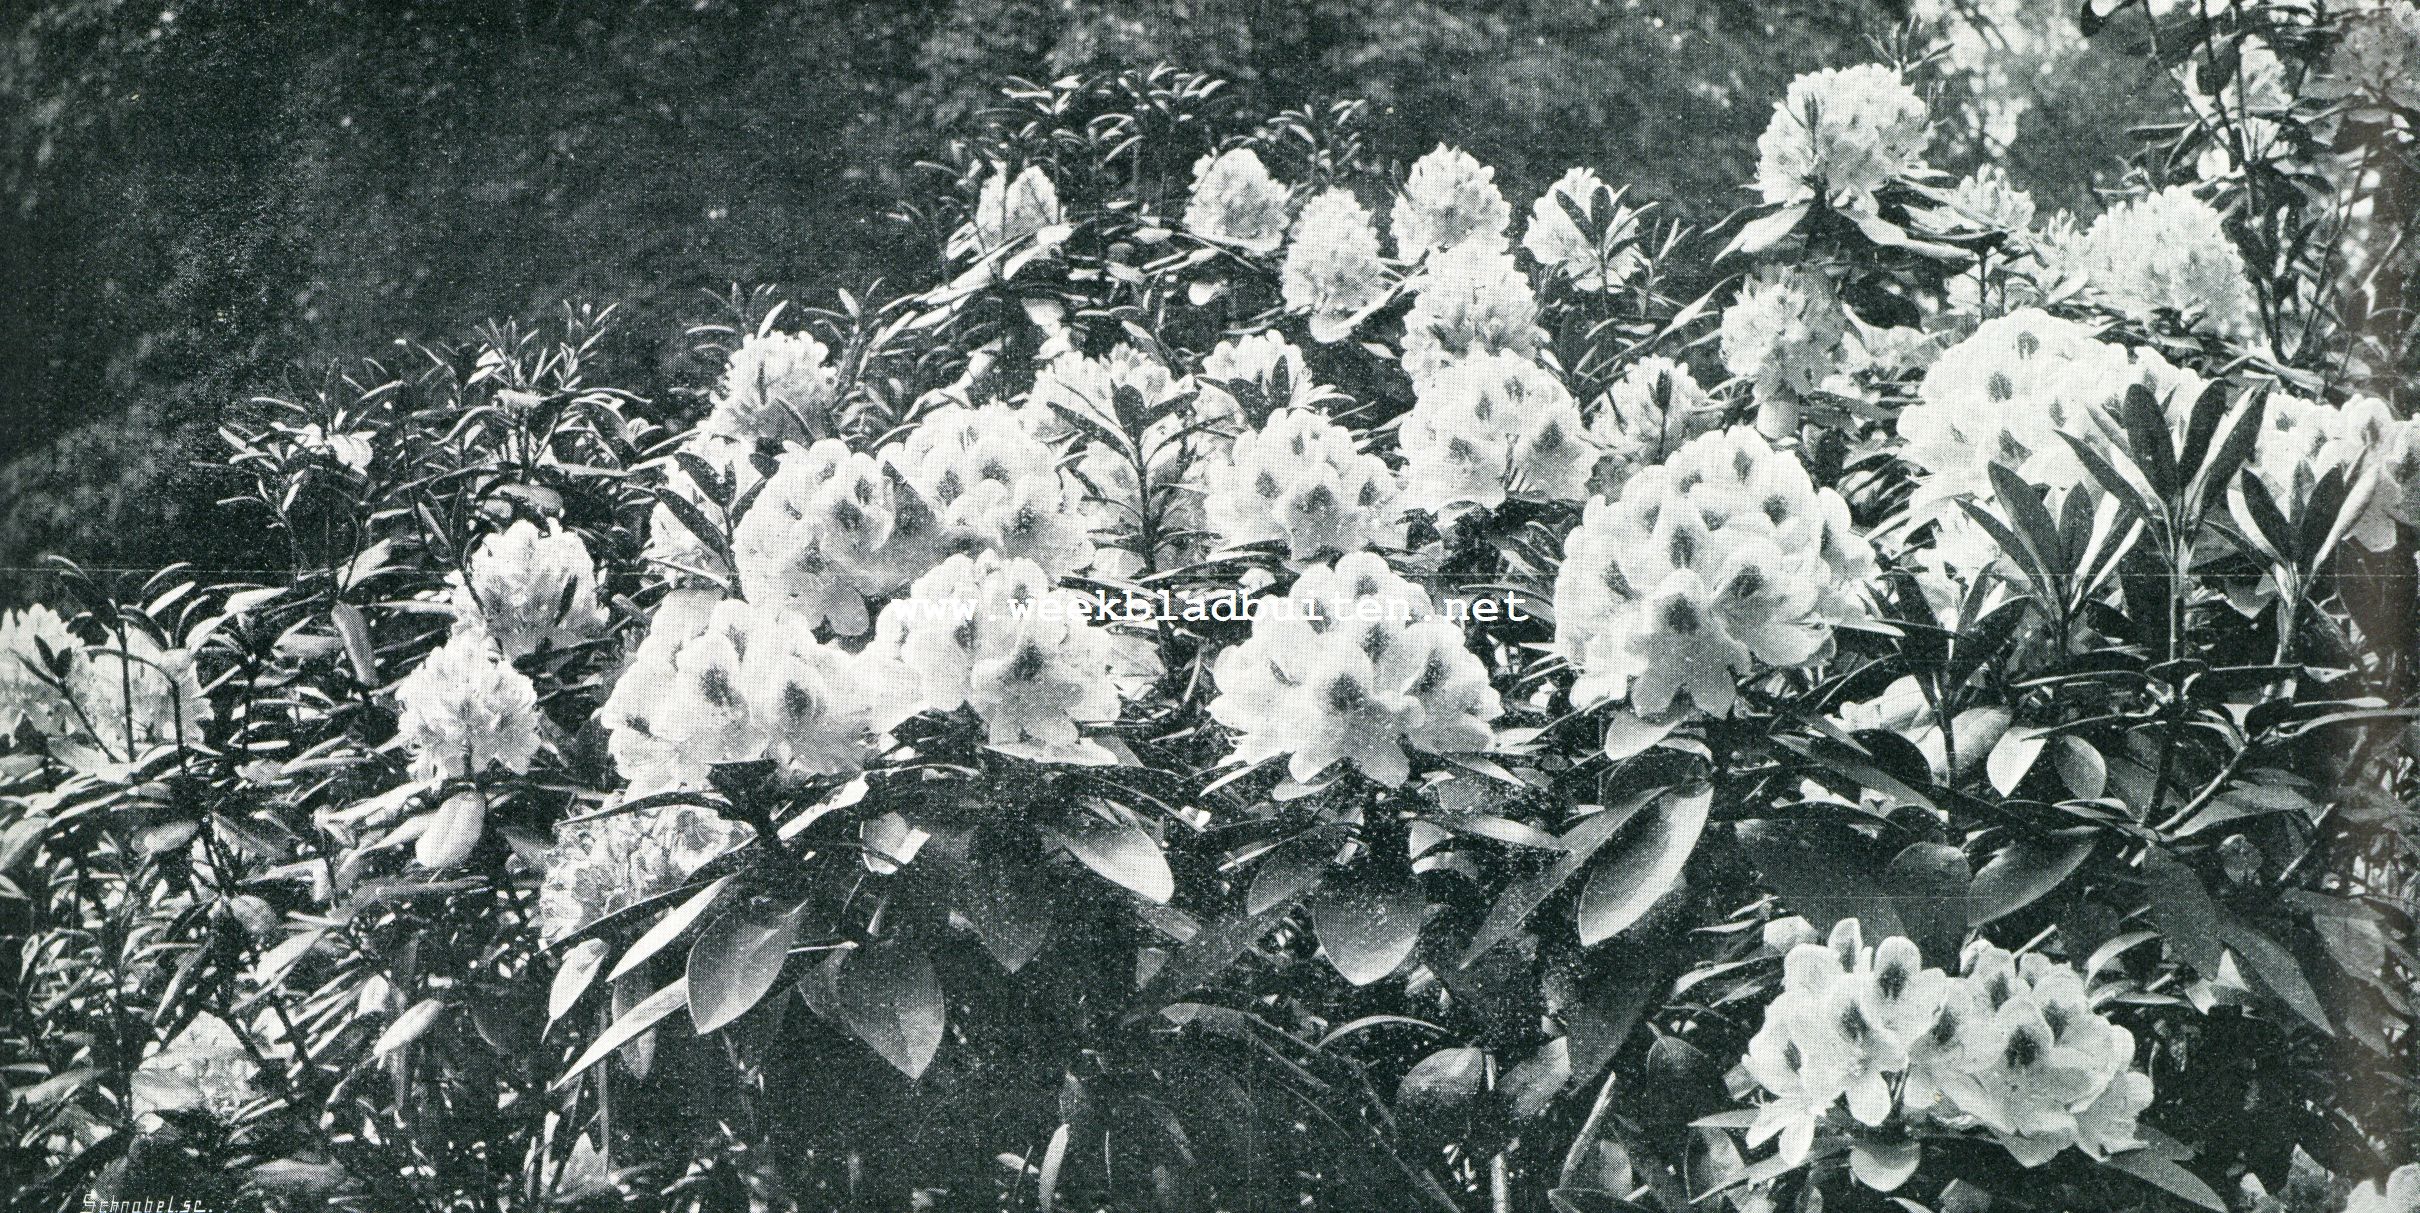 RHODODENDRONS 1